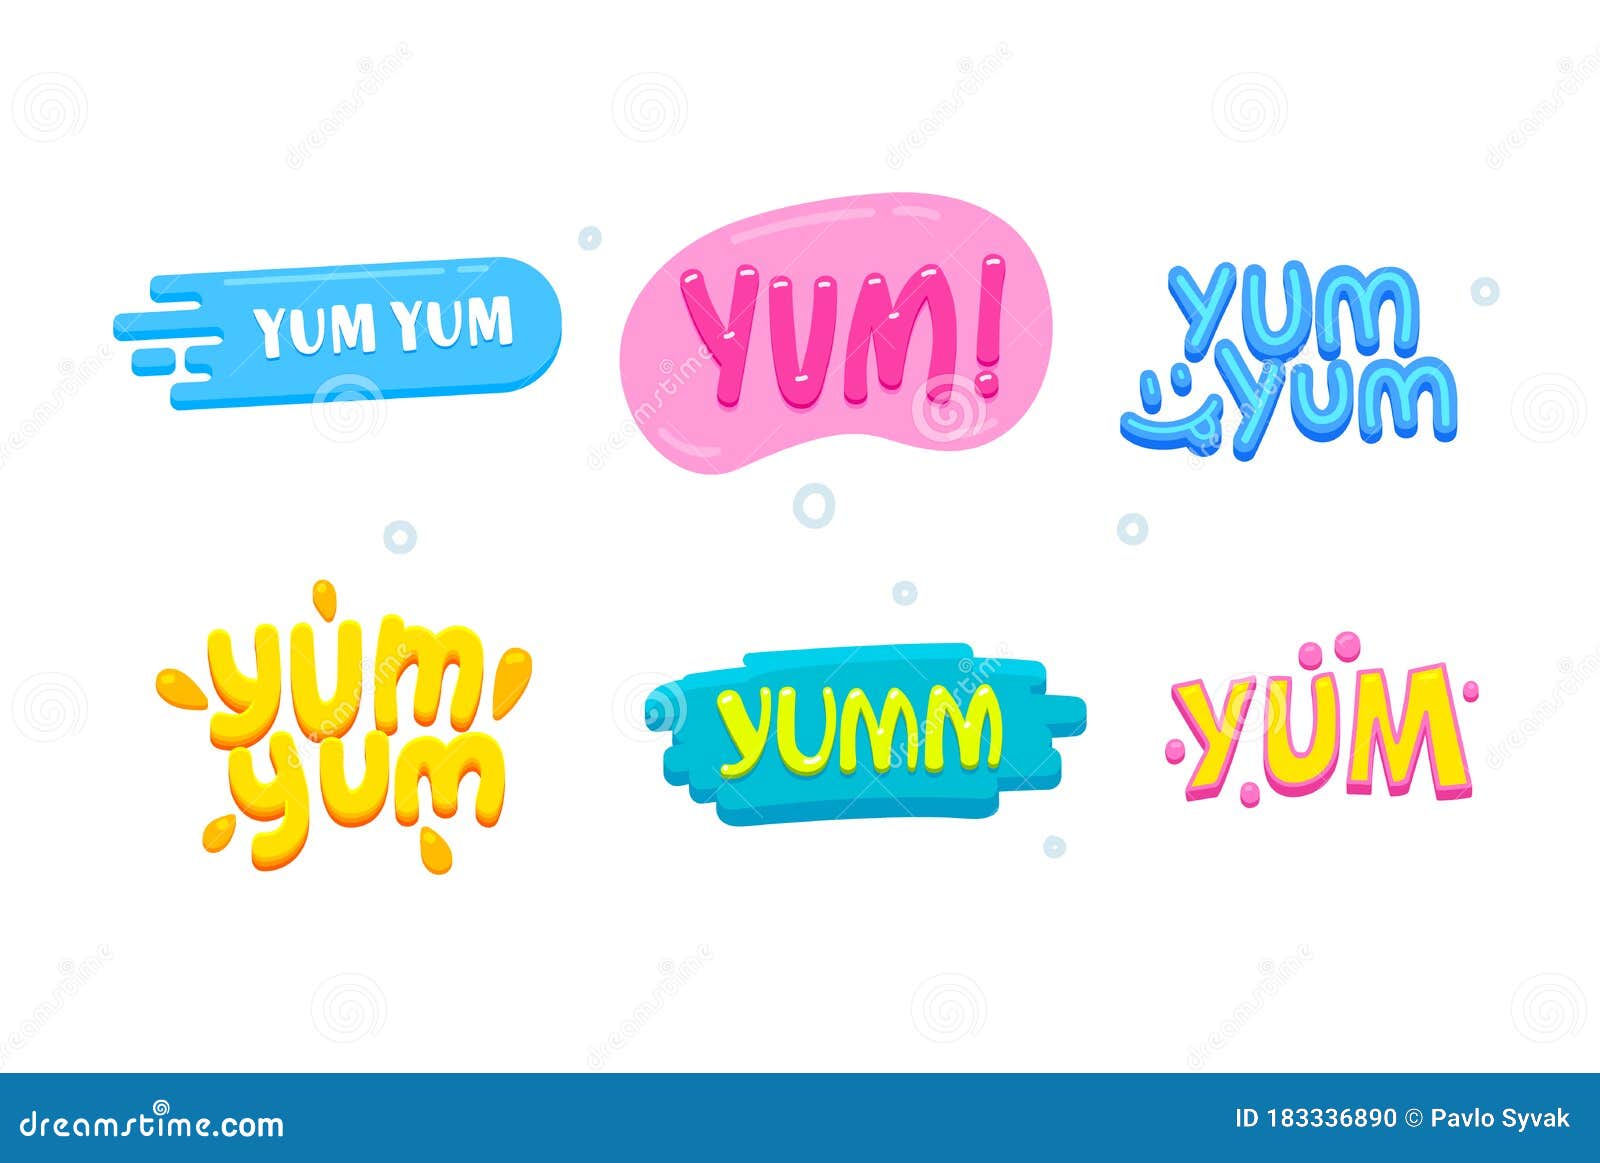 Yum Yum Icons Set. Creative Banners with Colorful Typography and Design  Elements Stock Vector - Illustration of food, decorated: 183336890